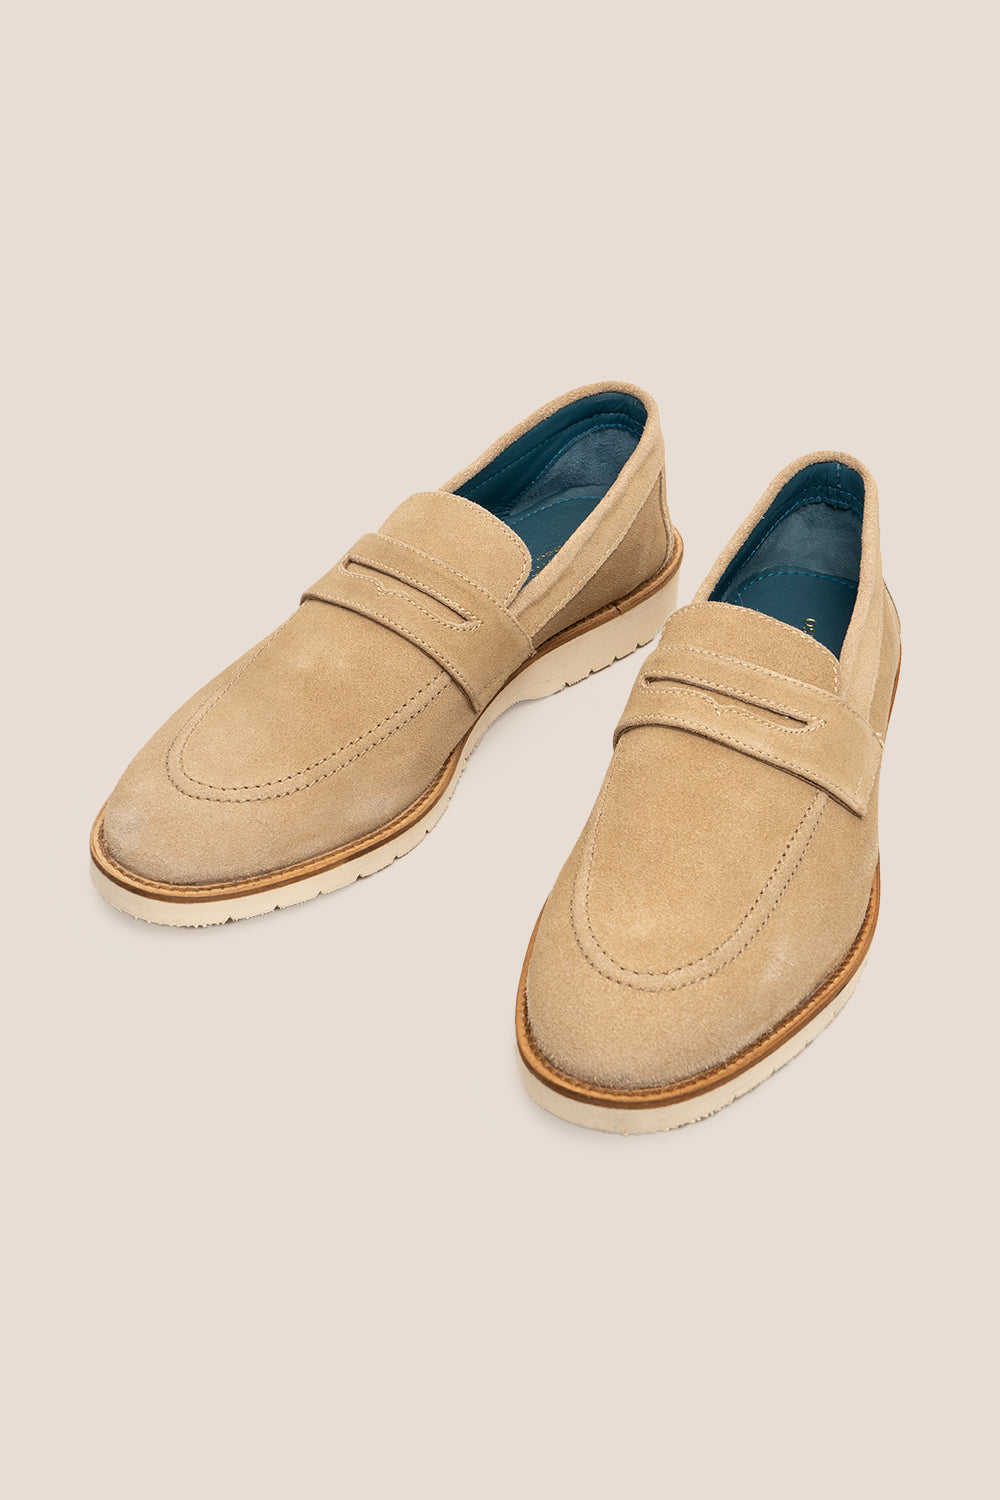 Mason sand suede mens loafer Oswin Hyde